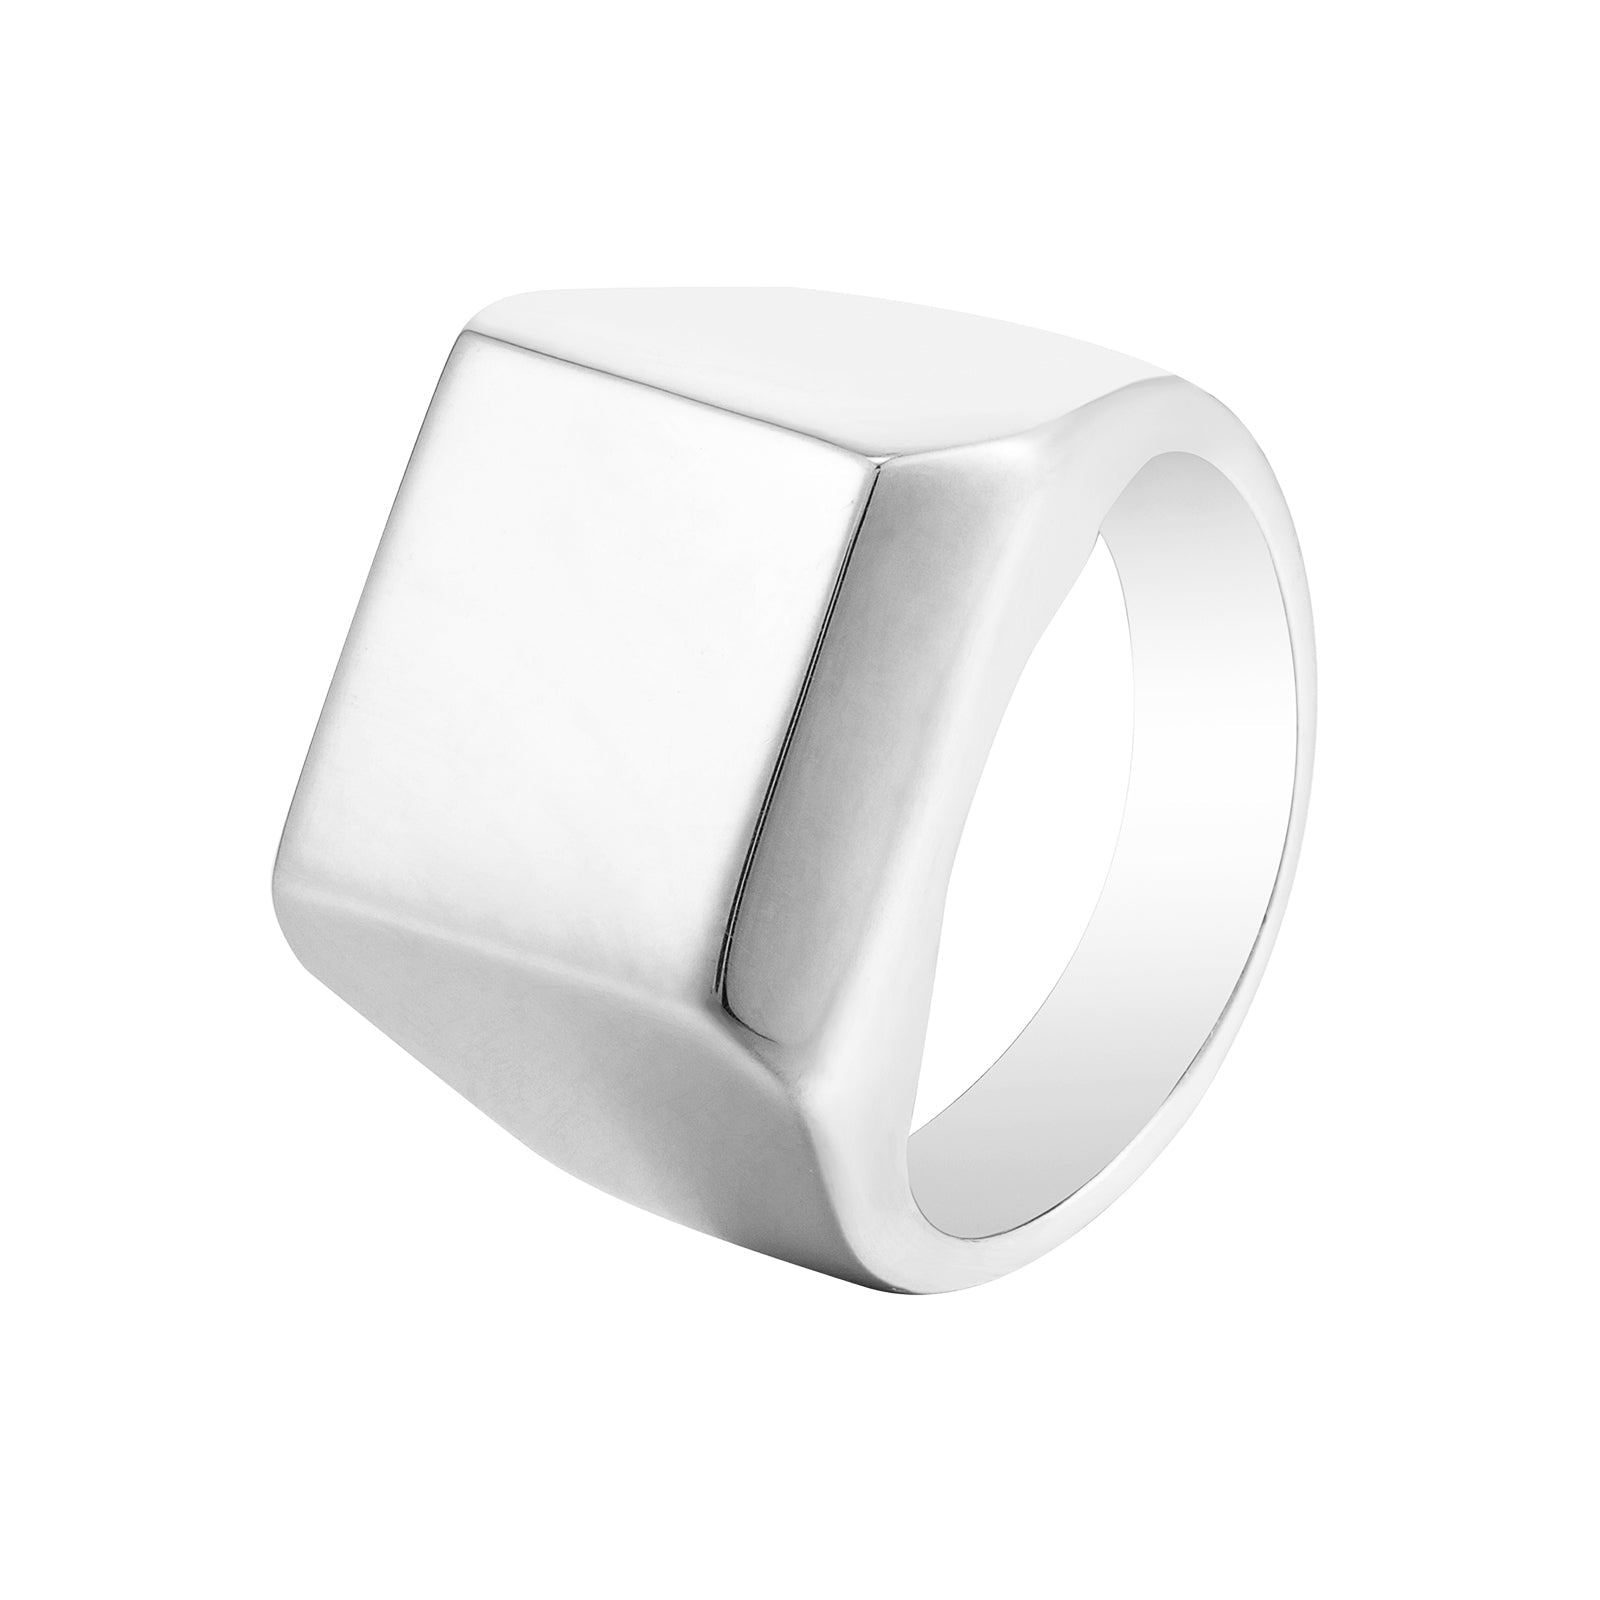 Seol Gold - Dome Square Signet Ring